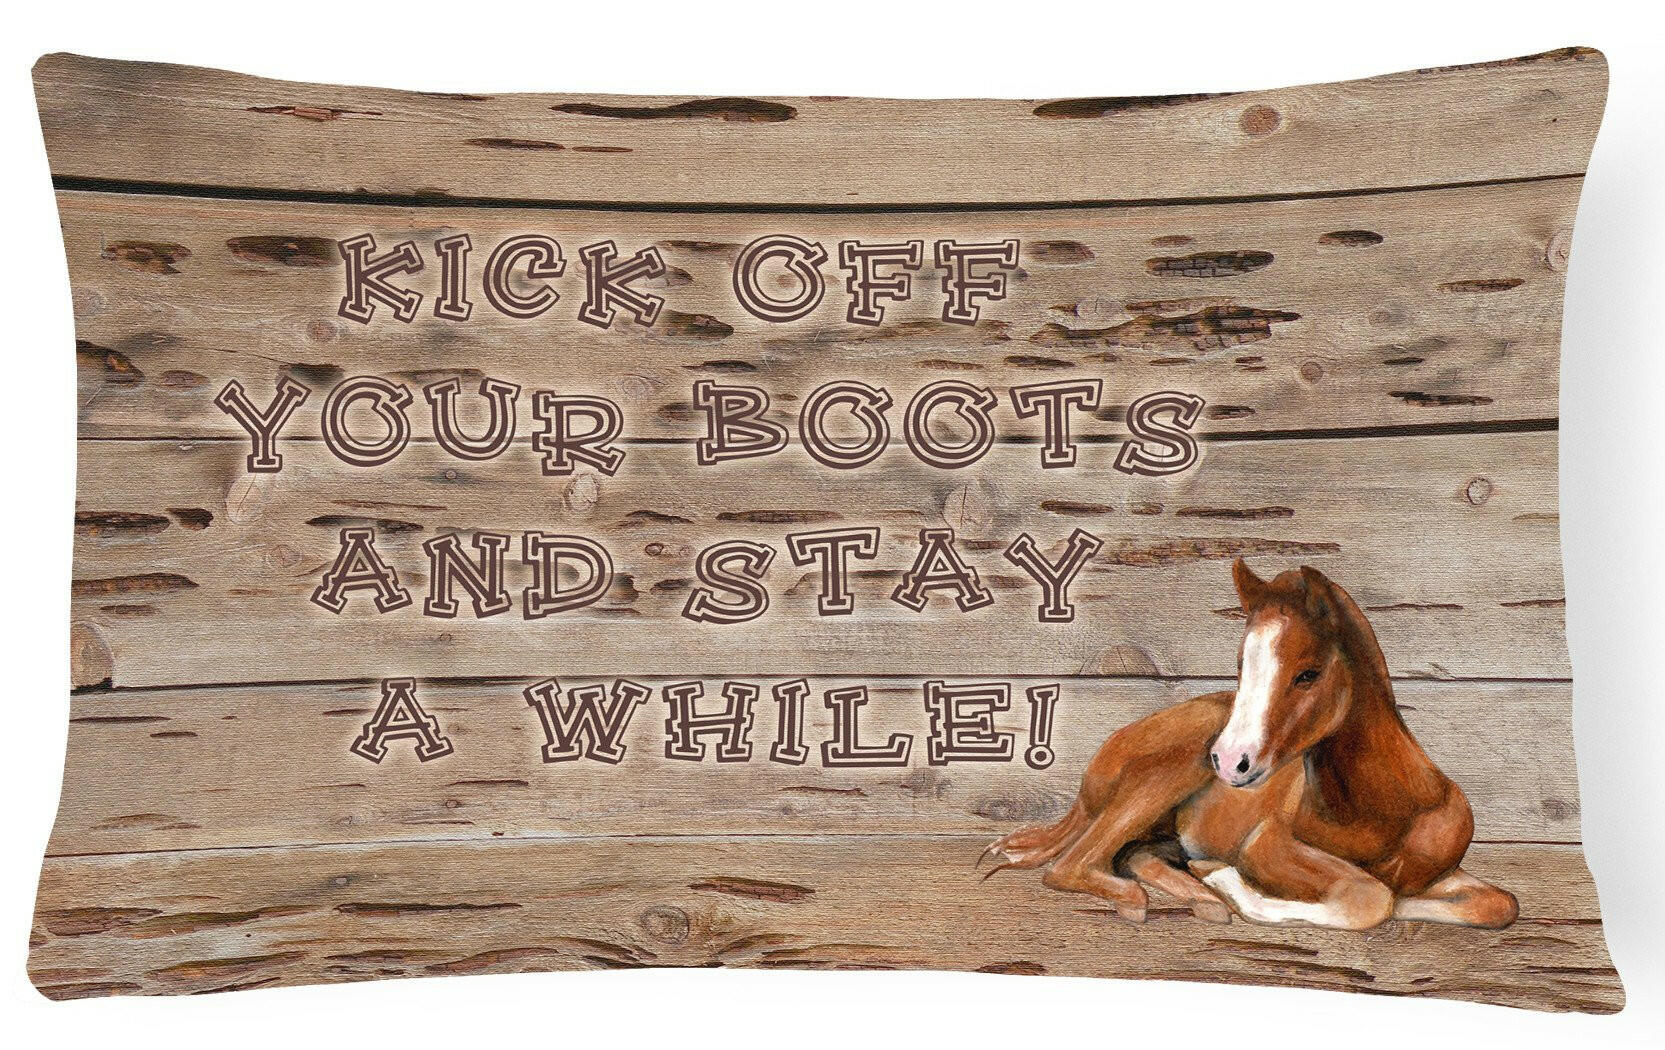 Kick off your boots and stay a while   Canvas Fabric Decorative Pillow SB3064PW1216 by Caroline's Treasures